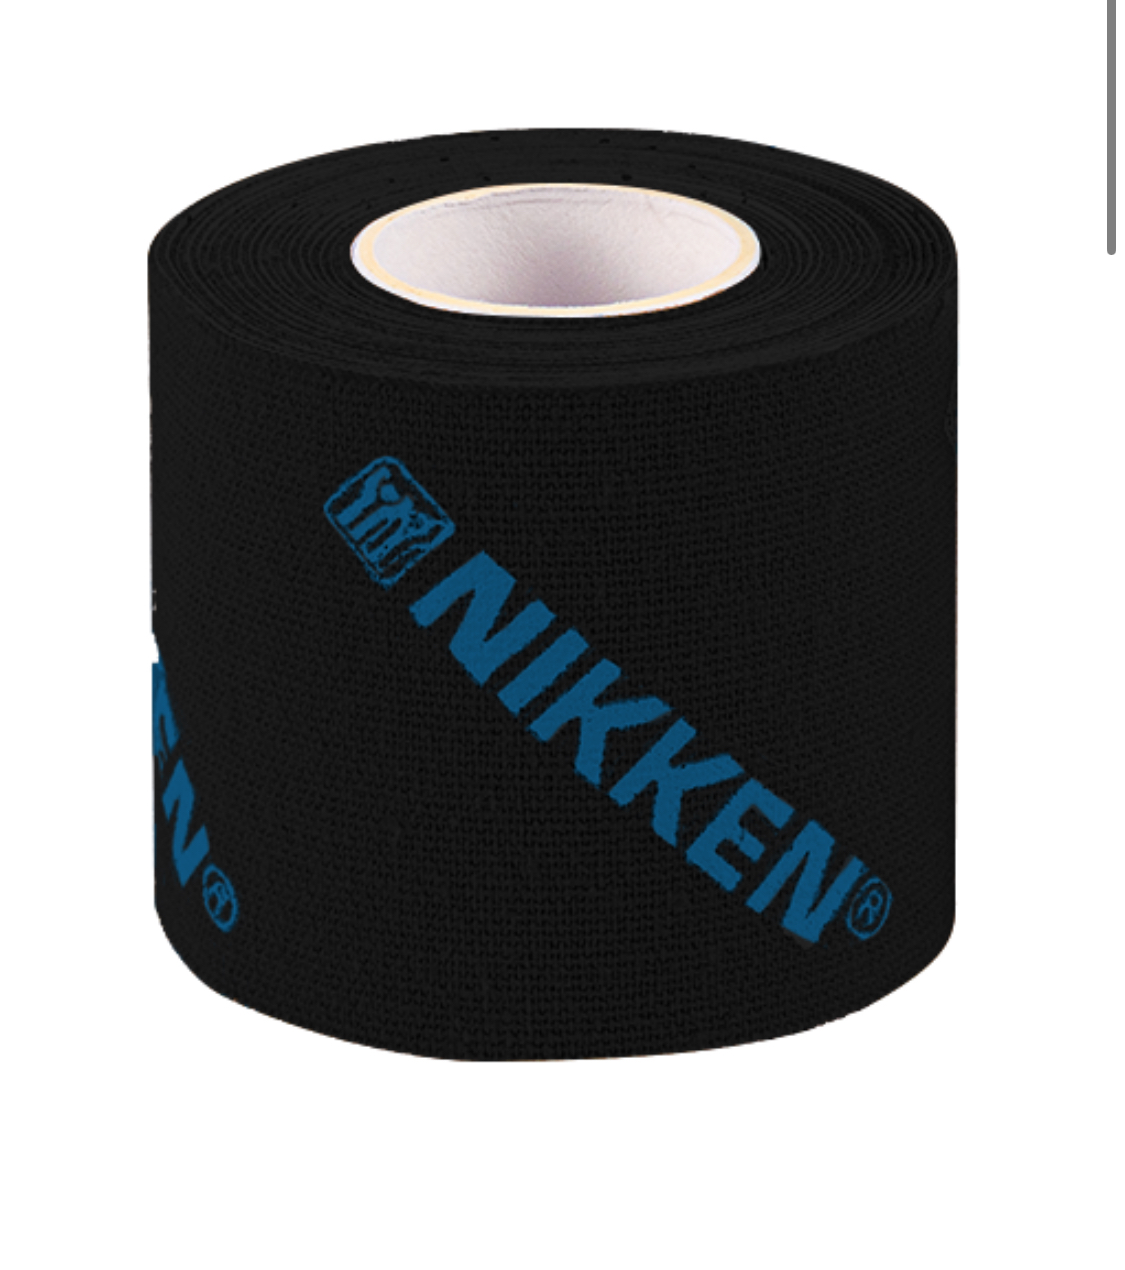 This tape is a kids best friend, wrap on knees, joints